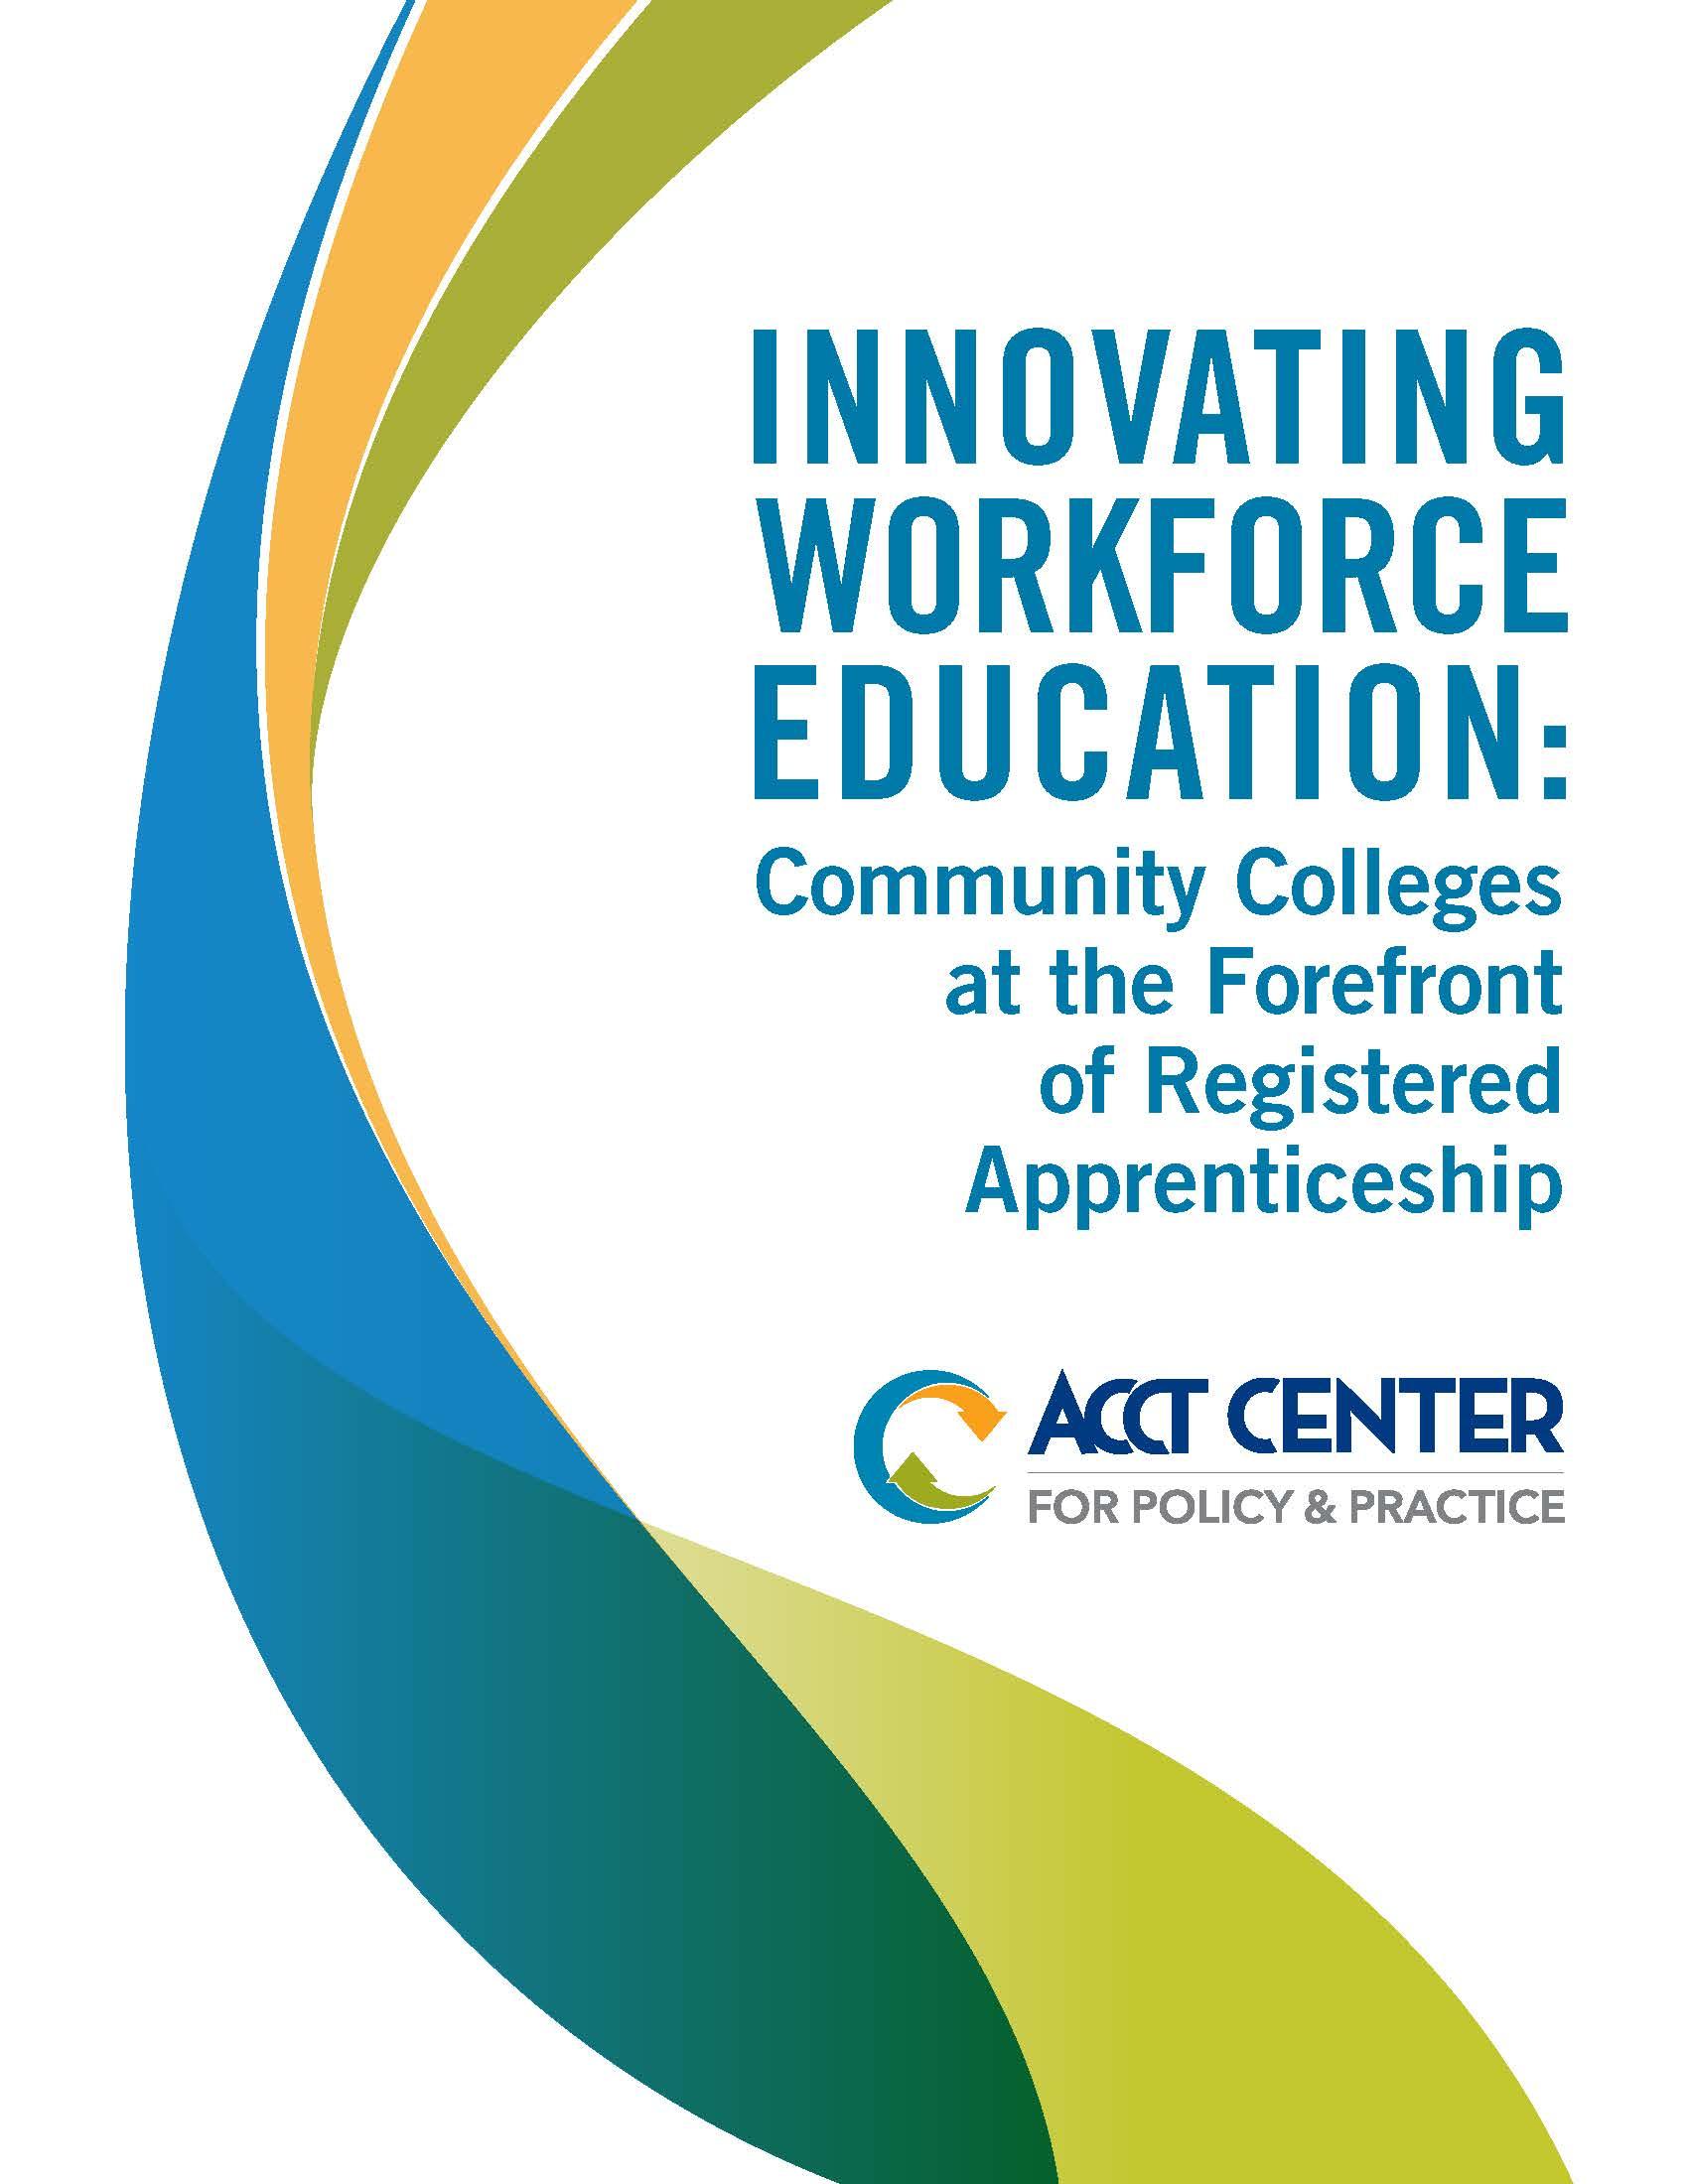 Innovating Workforce Education: Community Colleges at the Forefront of Registered Apprenticeships